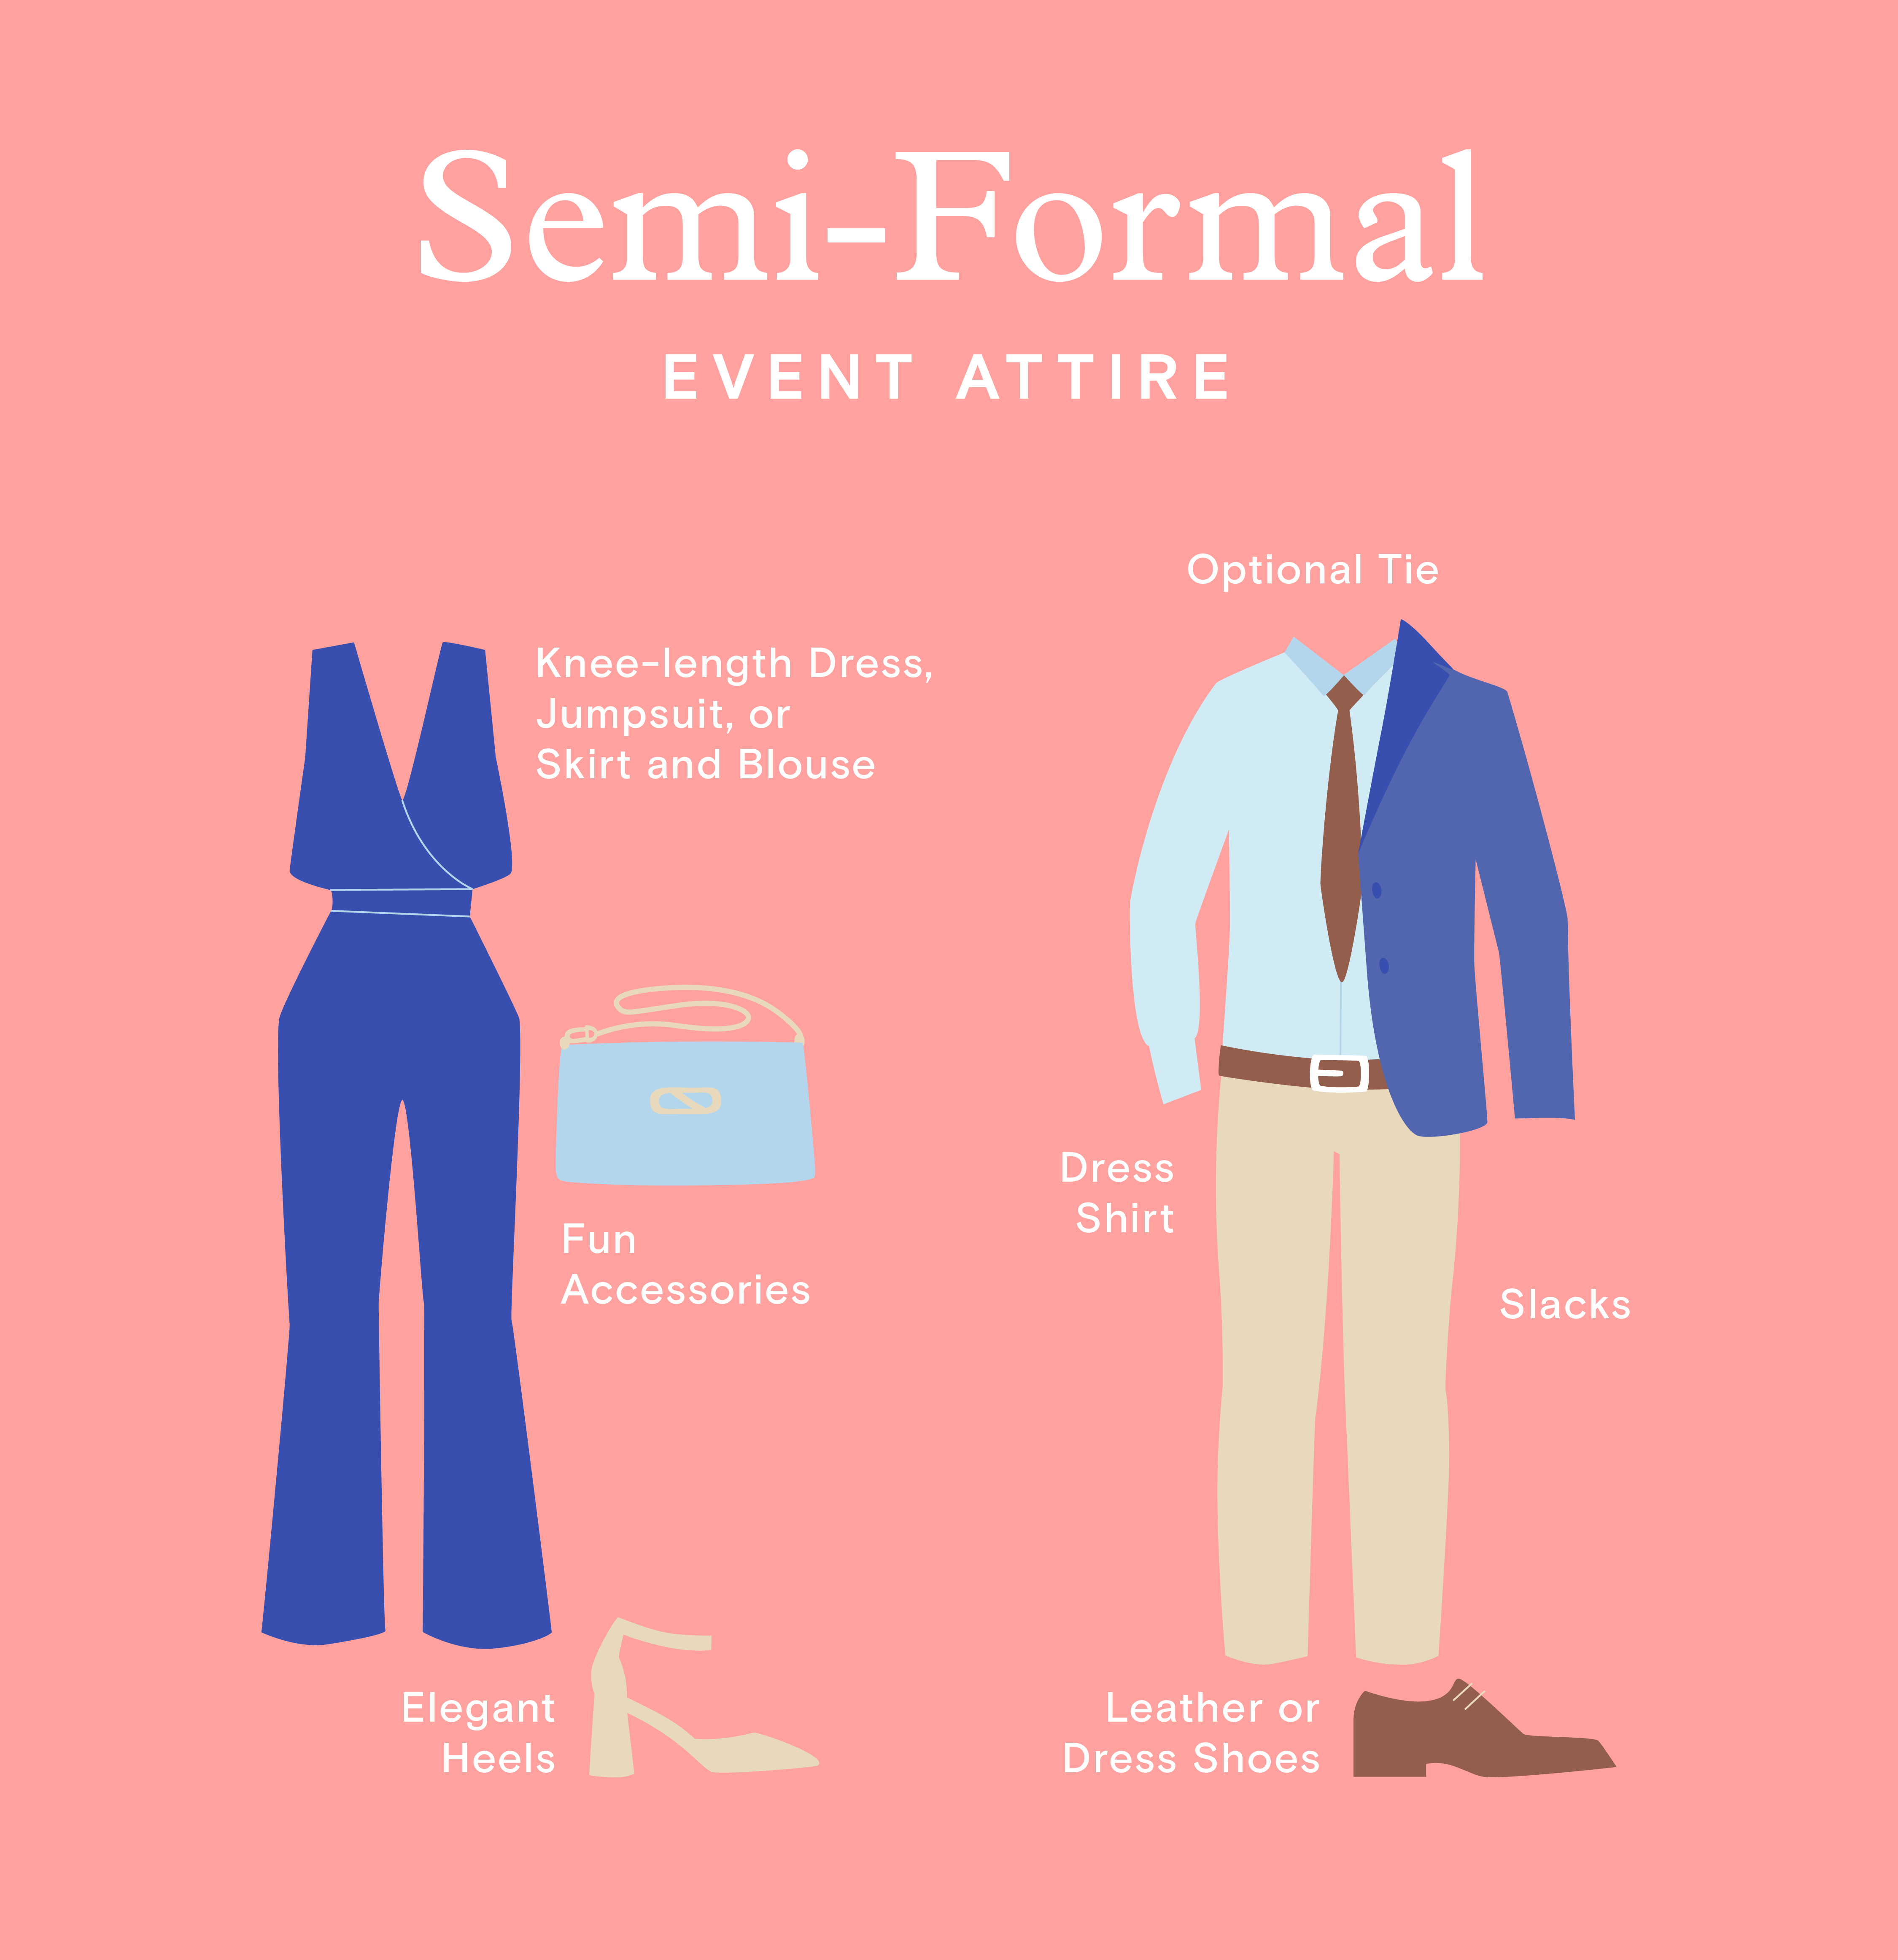 Wedding Dress Code: From Formal To Smart Casual